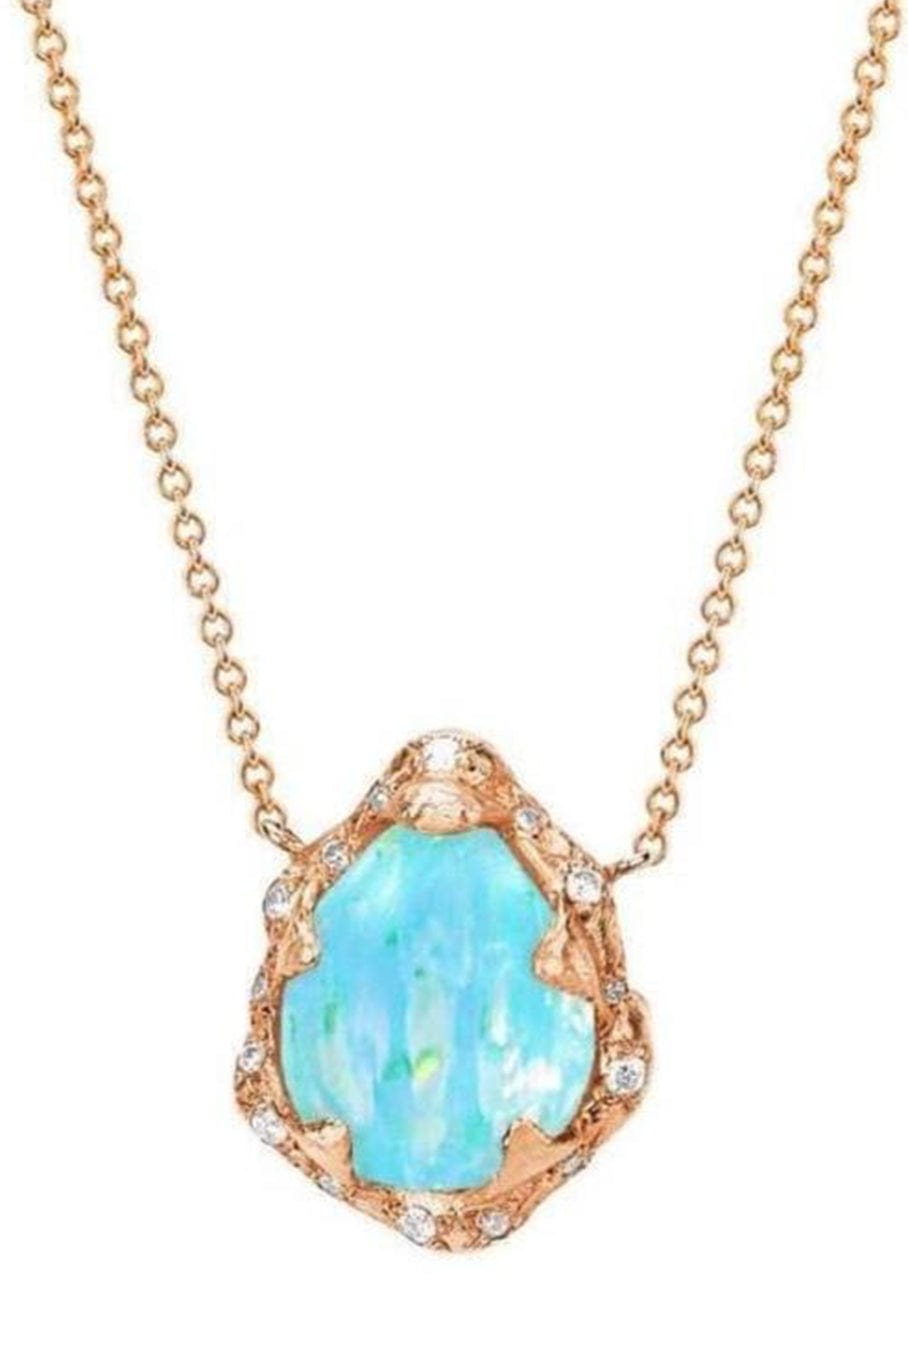 LOGAN HOLLOWELL-Baby Queen Water Drop Blue Opal Necklace with Sprinkled Diamonds-